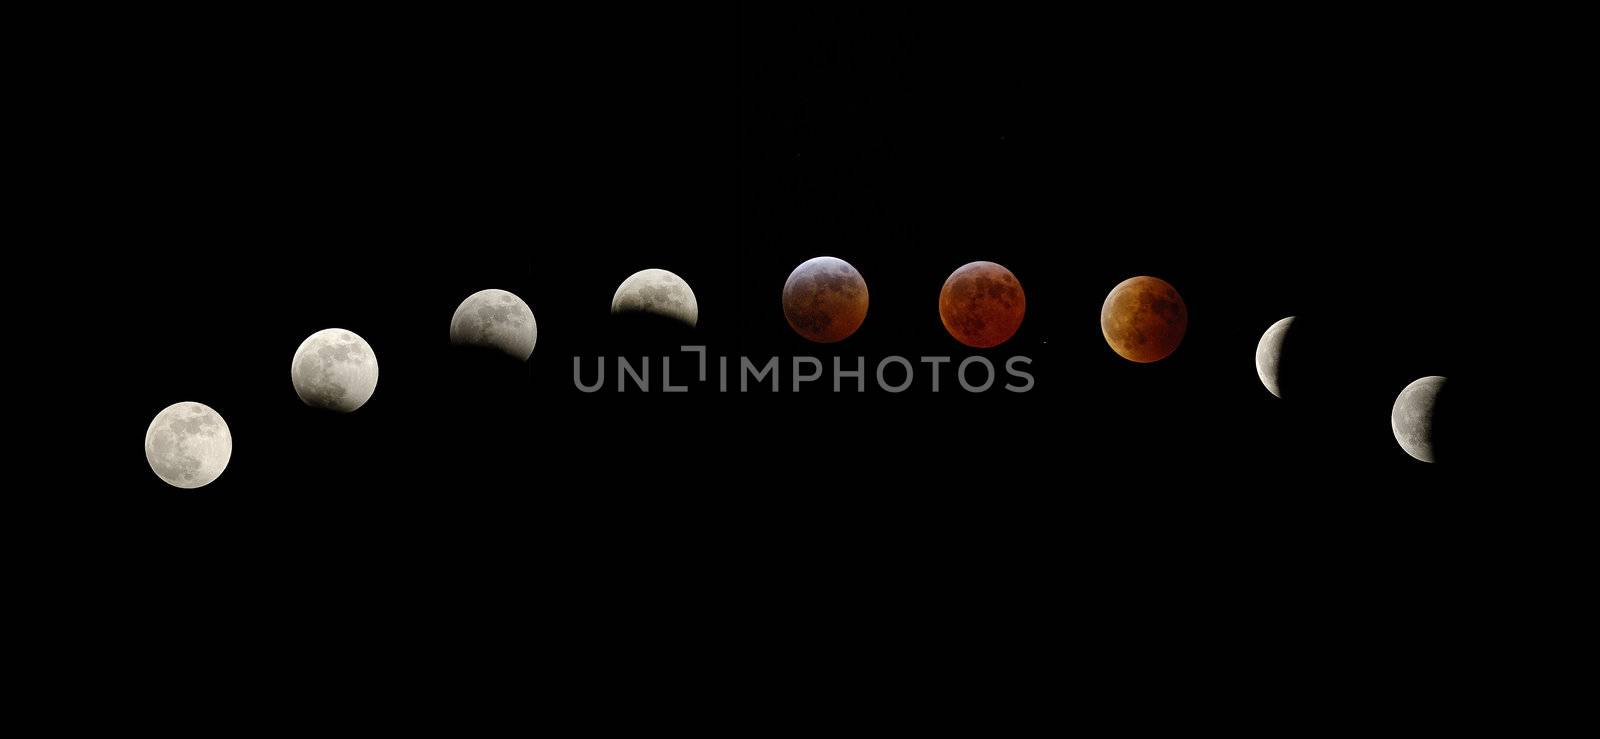 Phases of total lunar eclipse by AlessandroZocc